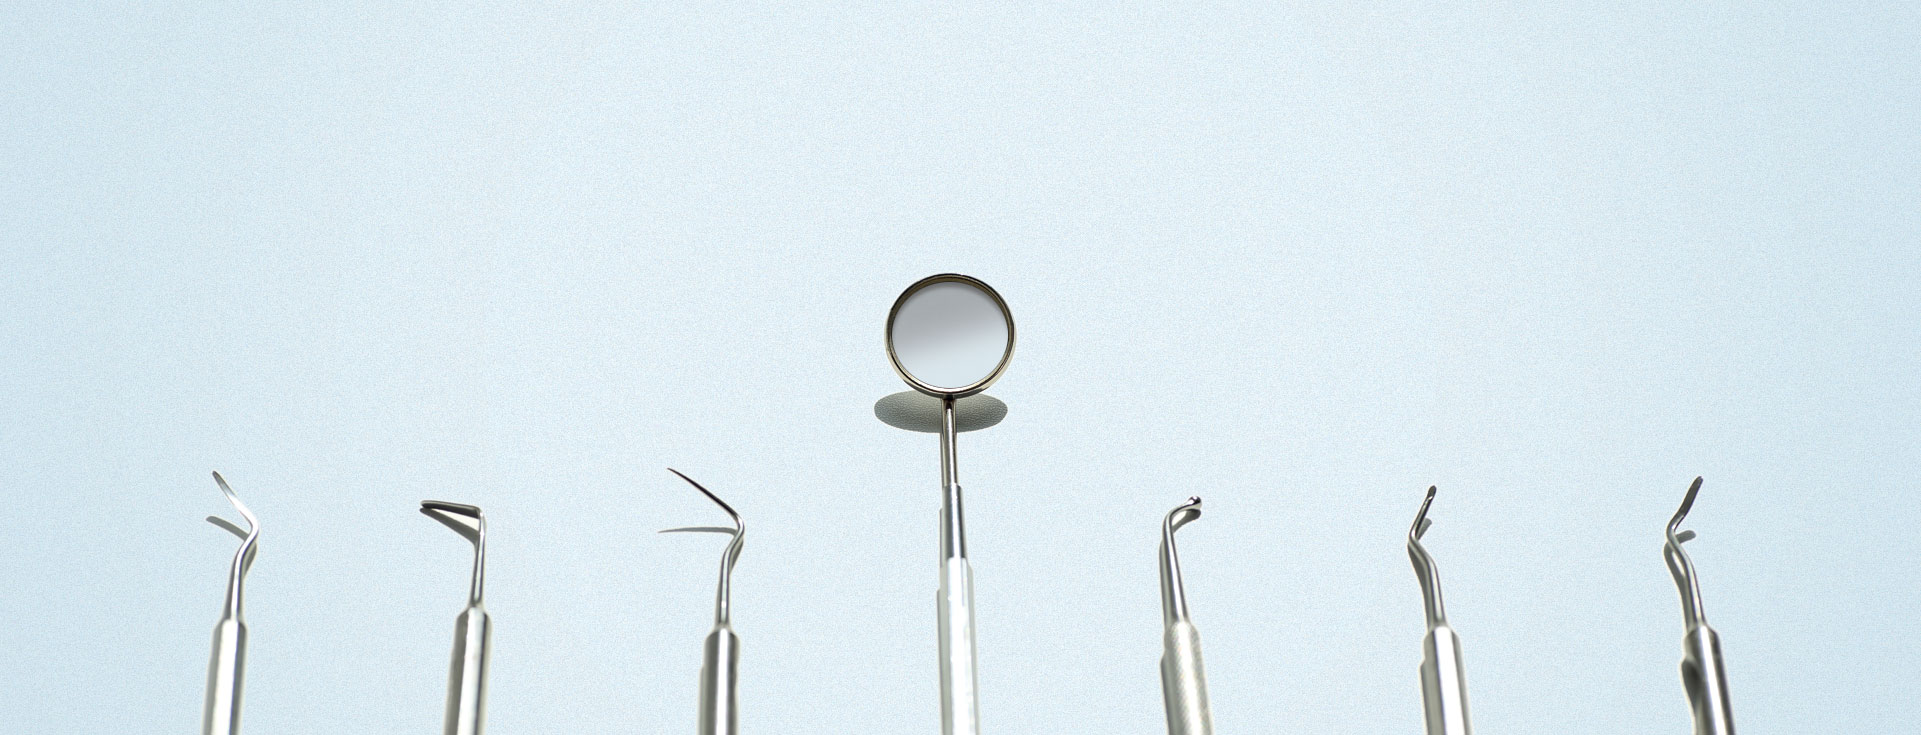 B2B Supplier of high quality dental products